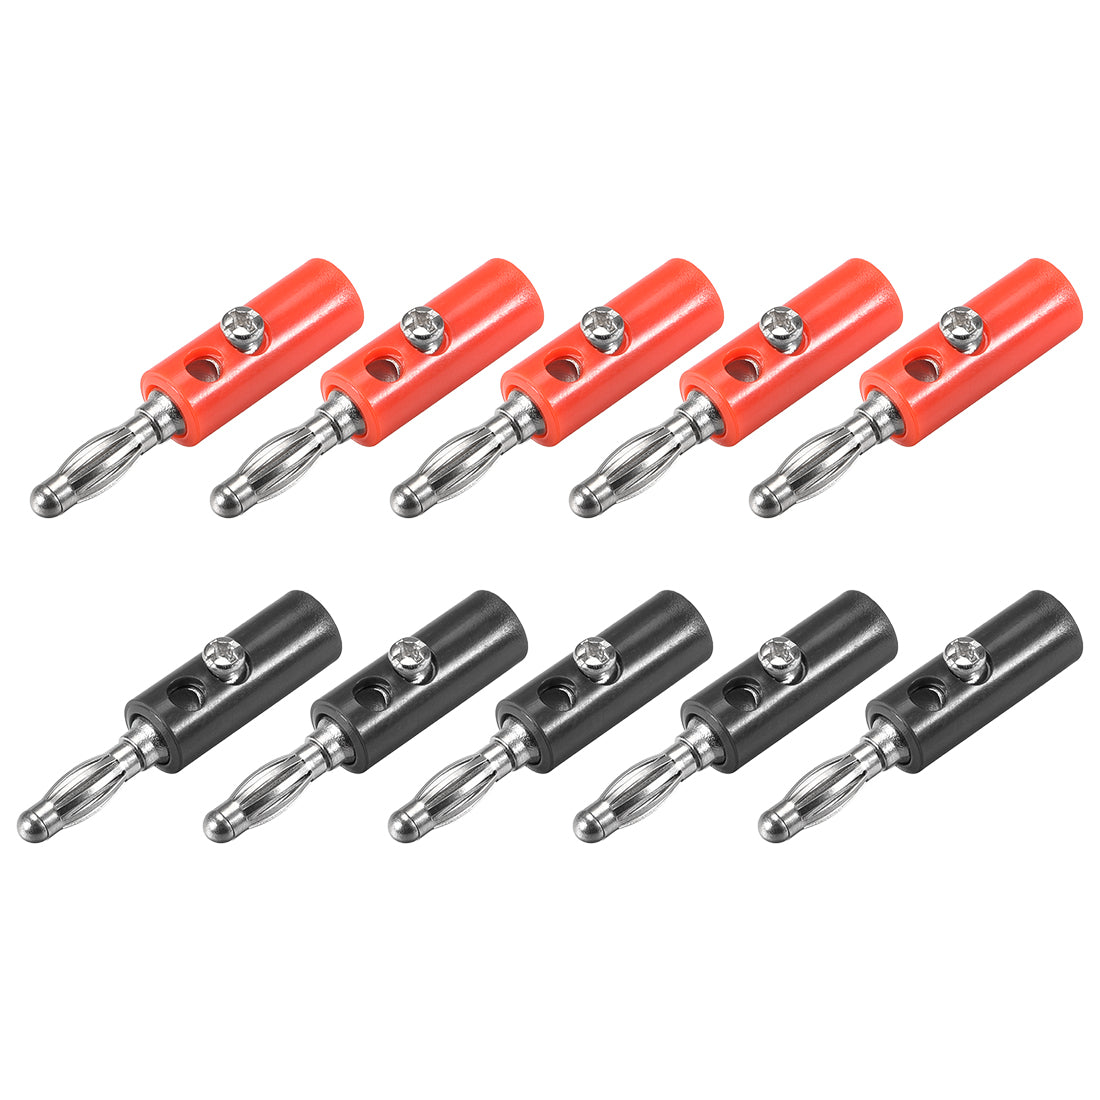 uxcell Uxcell 4mm Banana Speaker Wire Cable Screw Plugs Connectors 2 Colors 10pcs Jack Connector